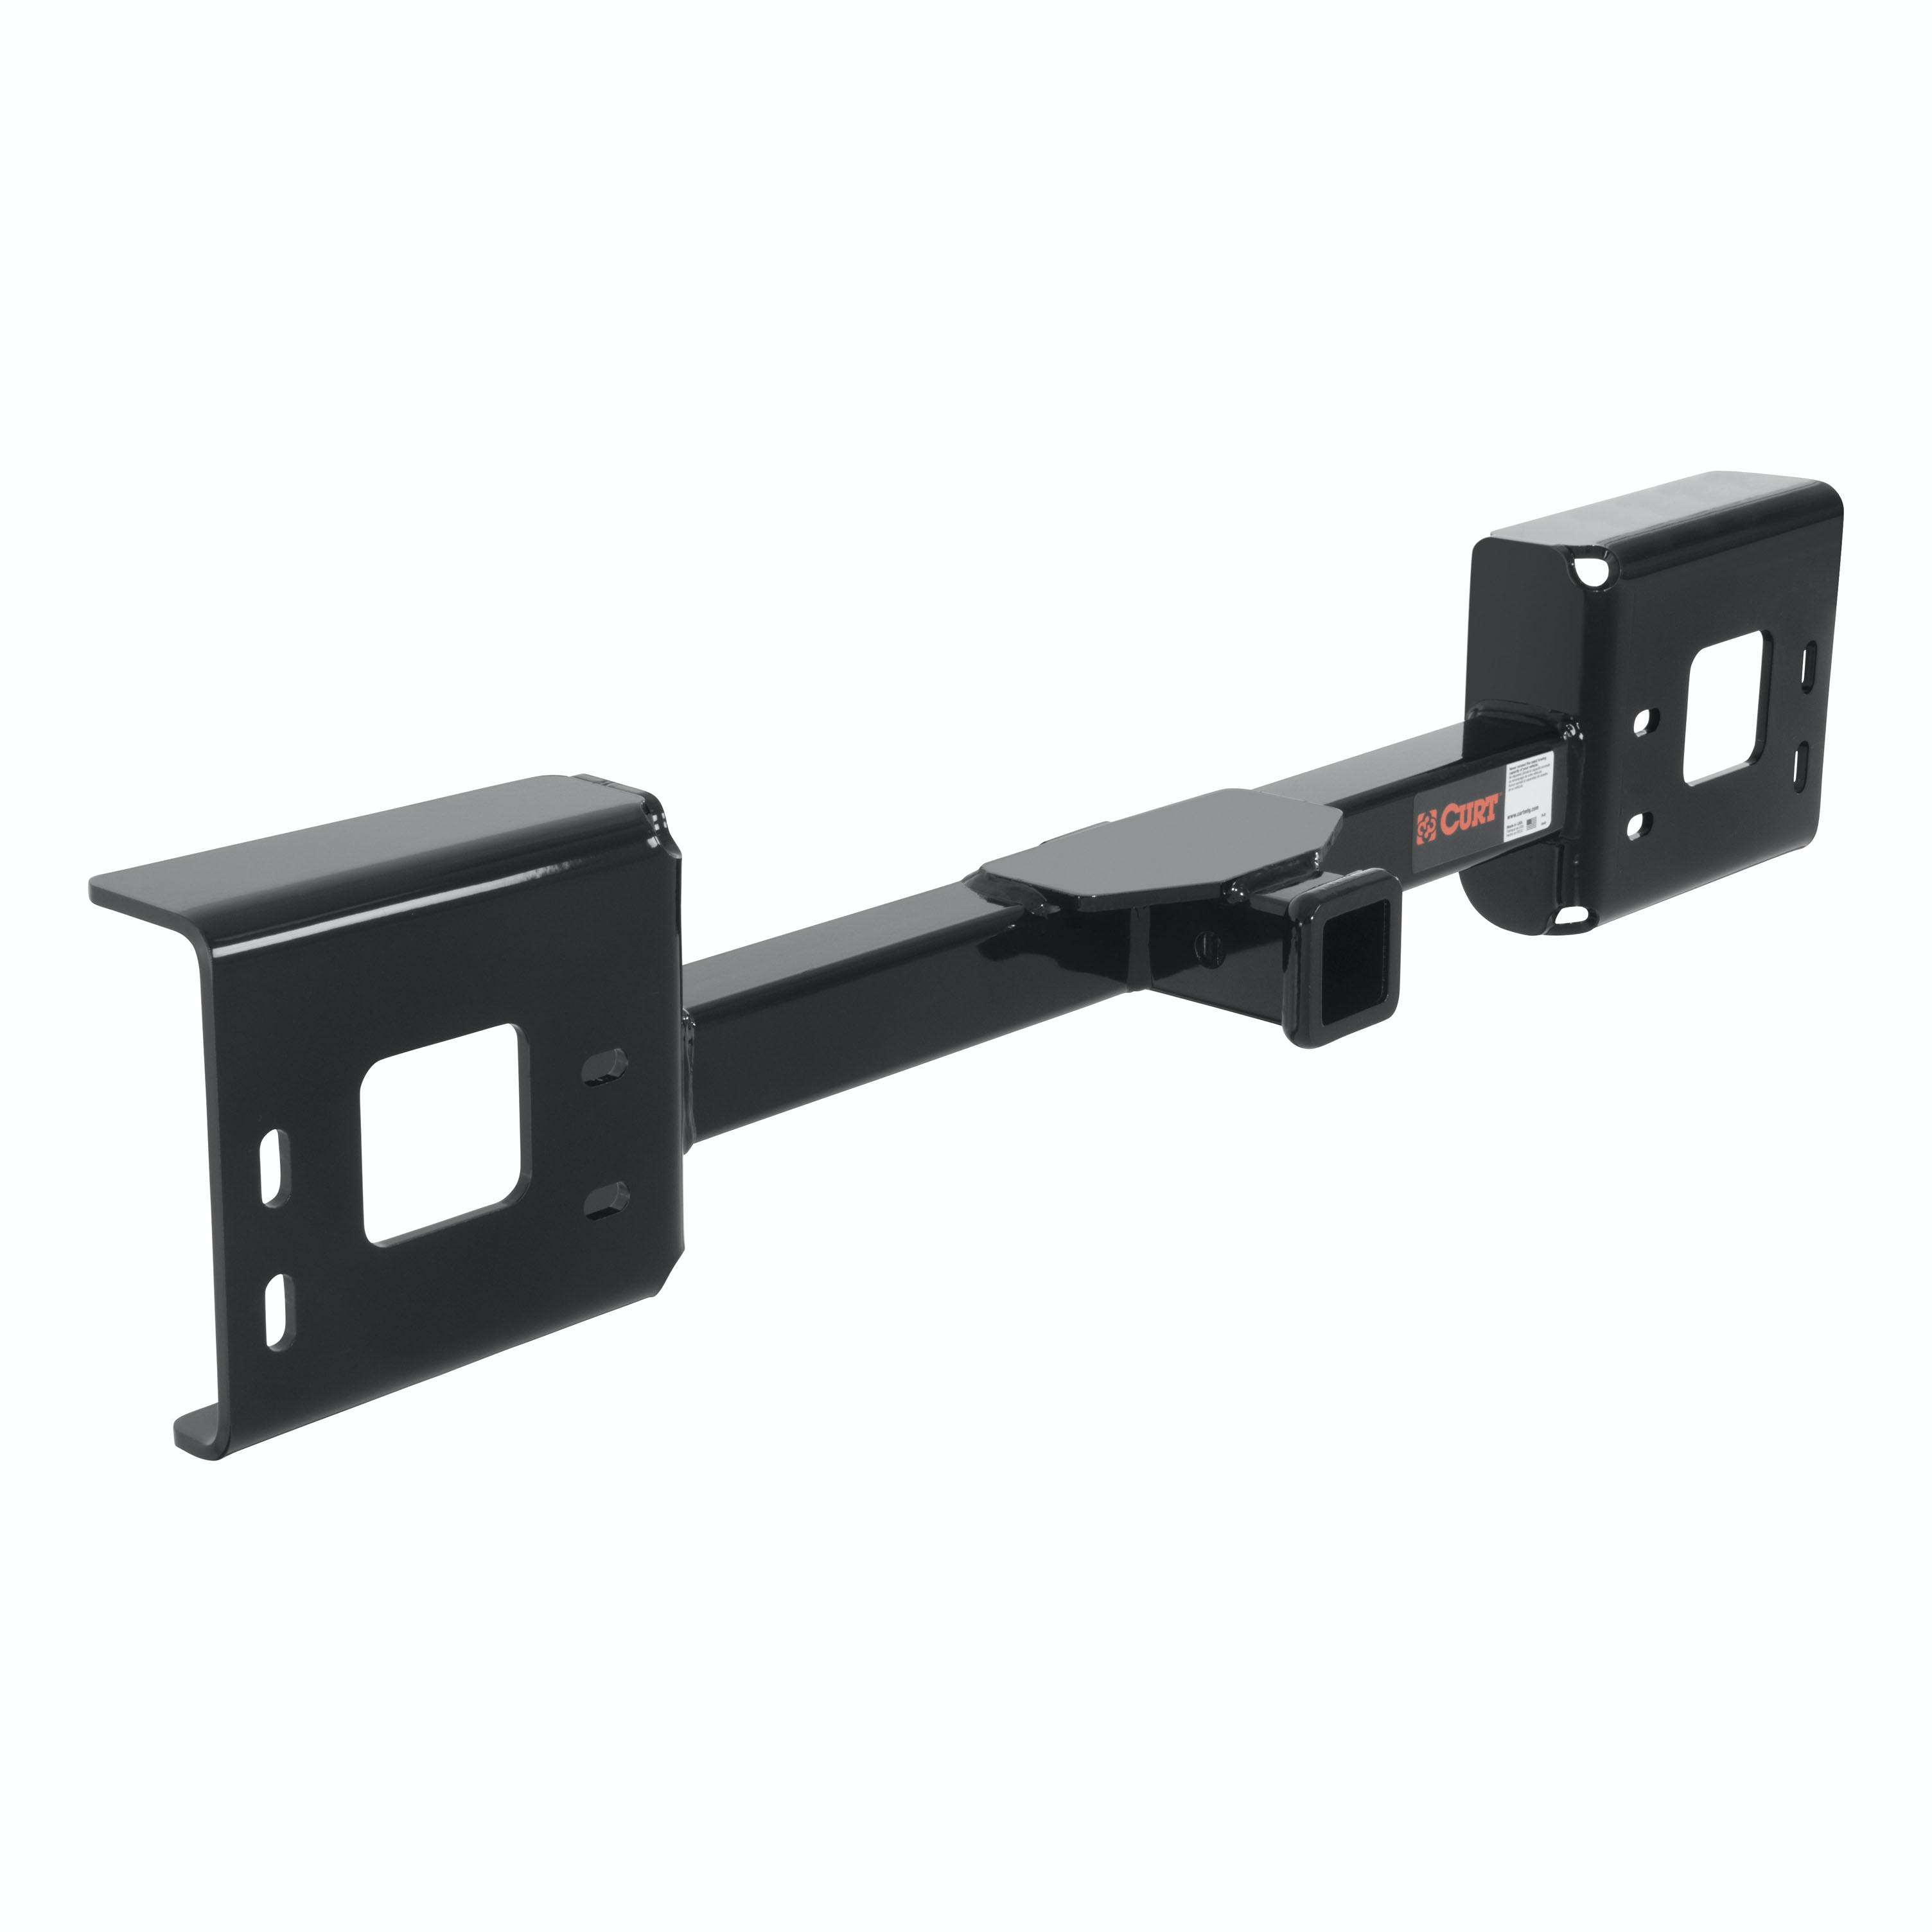 CURT 31114 2 Front Receiver Hitch, Select Ford Excursion, F-250, F-350, F-450, F-550